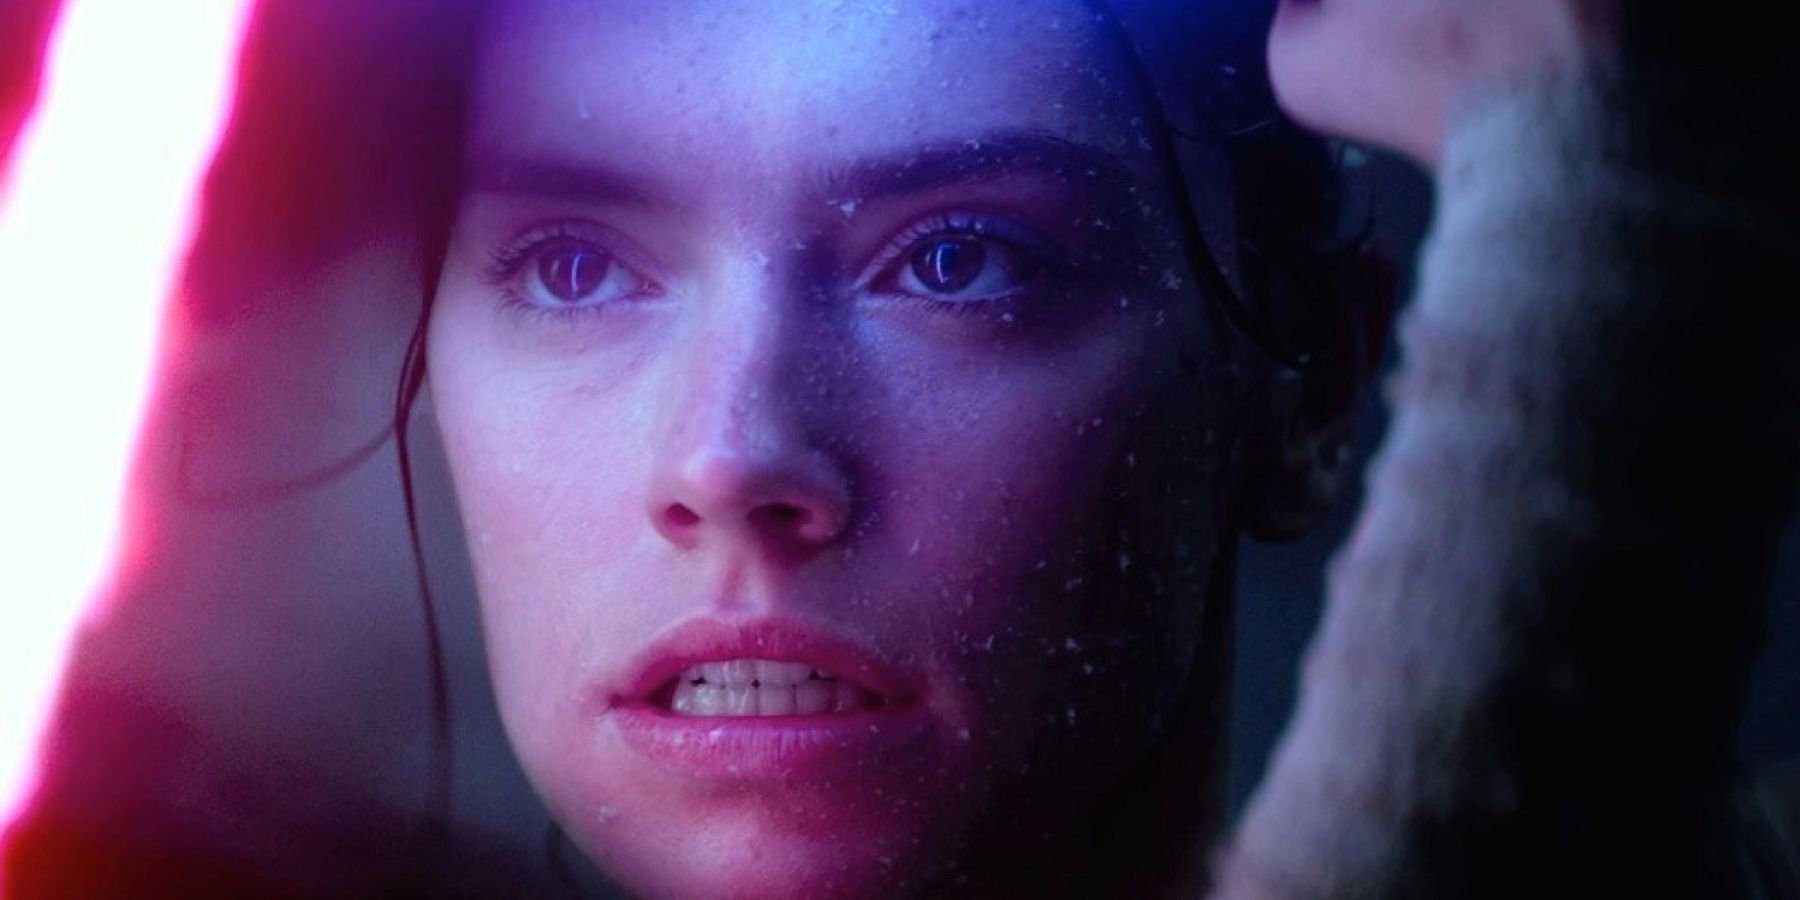 Young Jedi Rey, played by Actor Daisy Ridley, duels Kylo Ren in the snow of Starkiller Base in 'Star Wars: The Force Awakens'